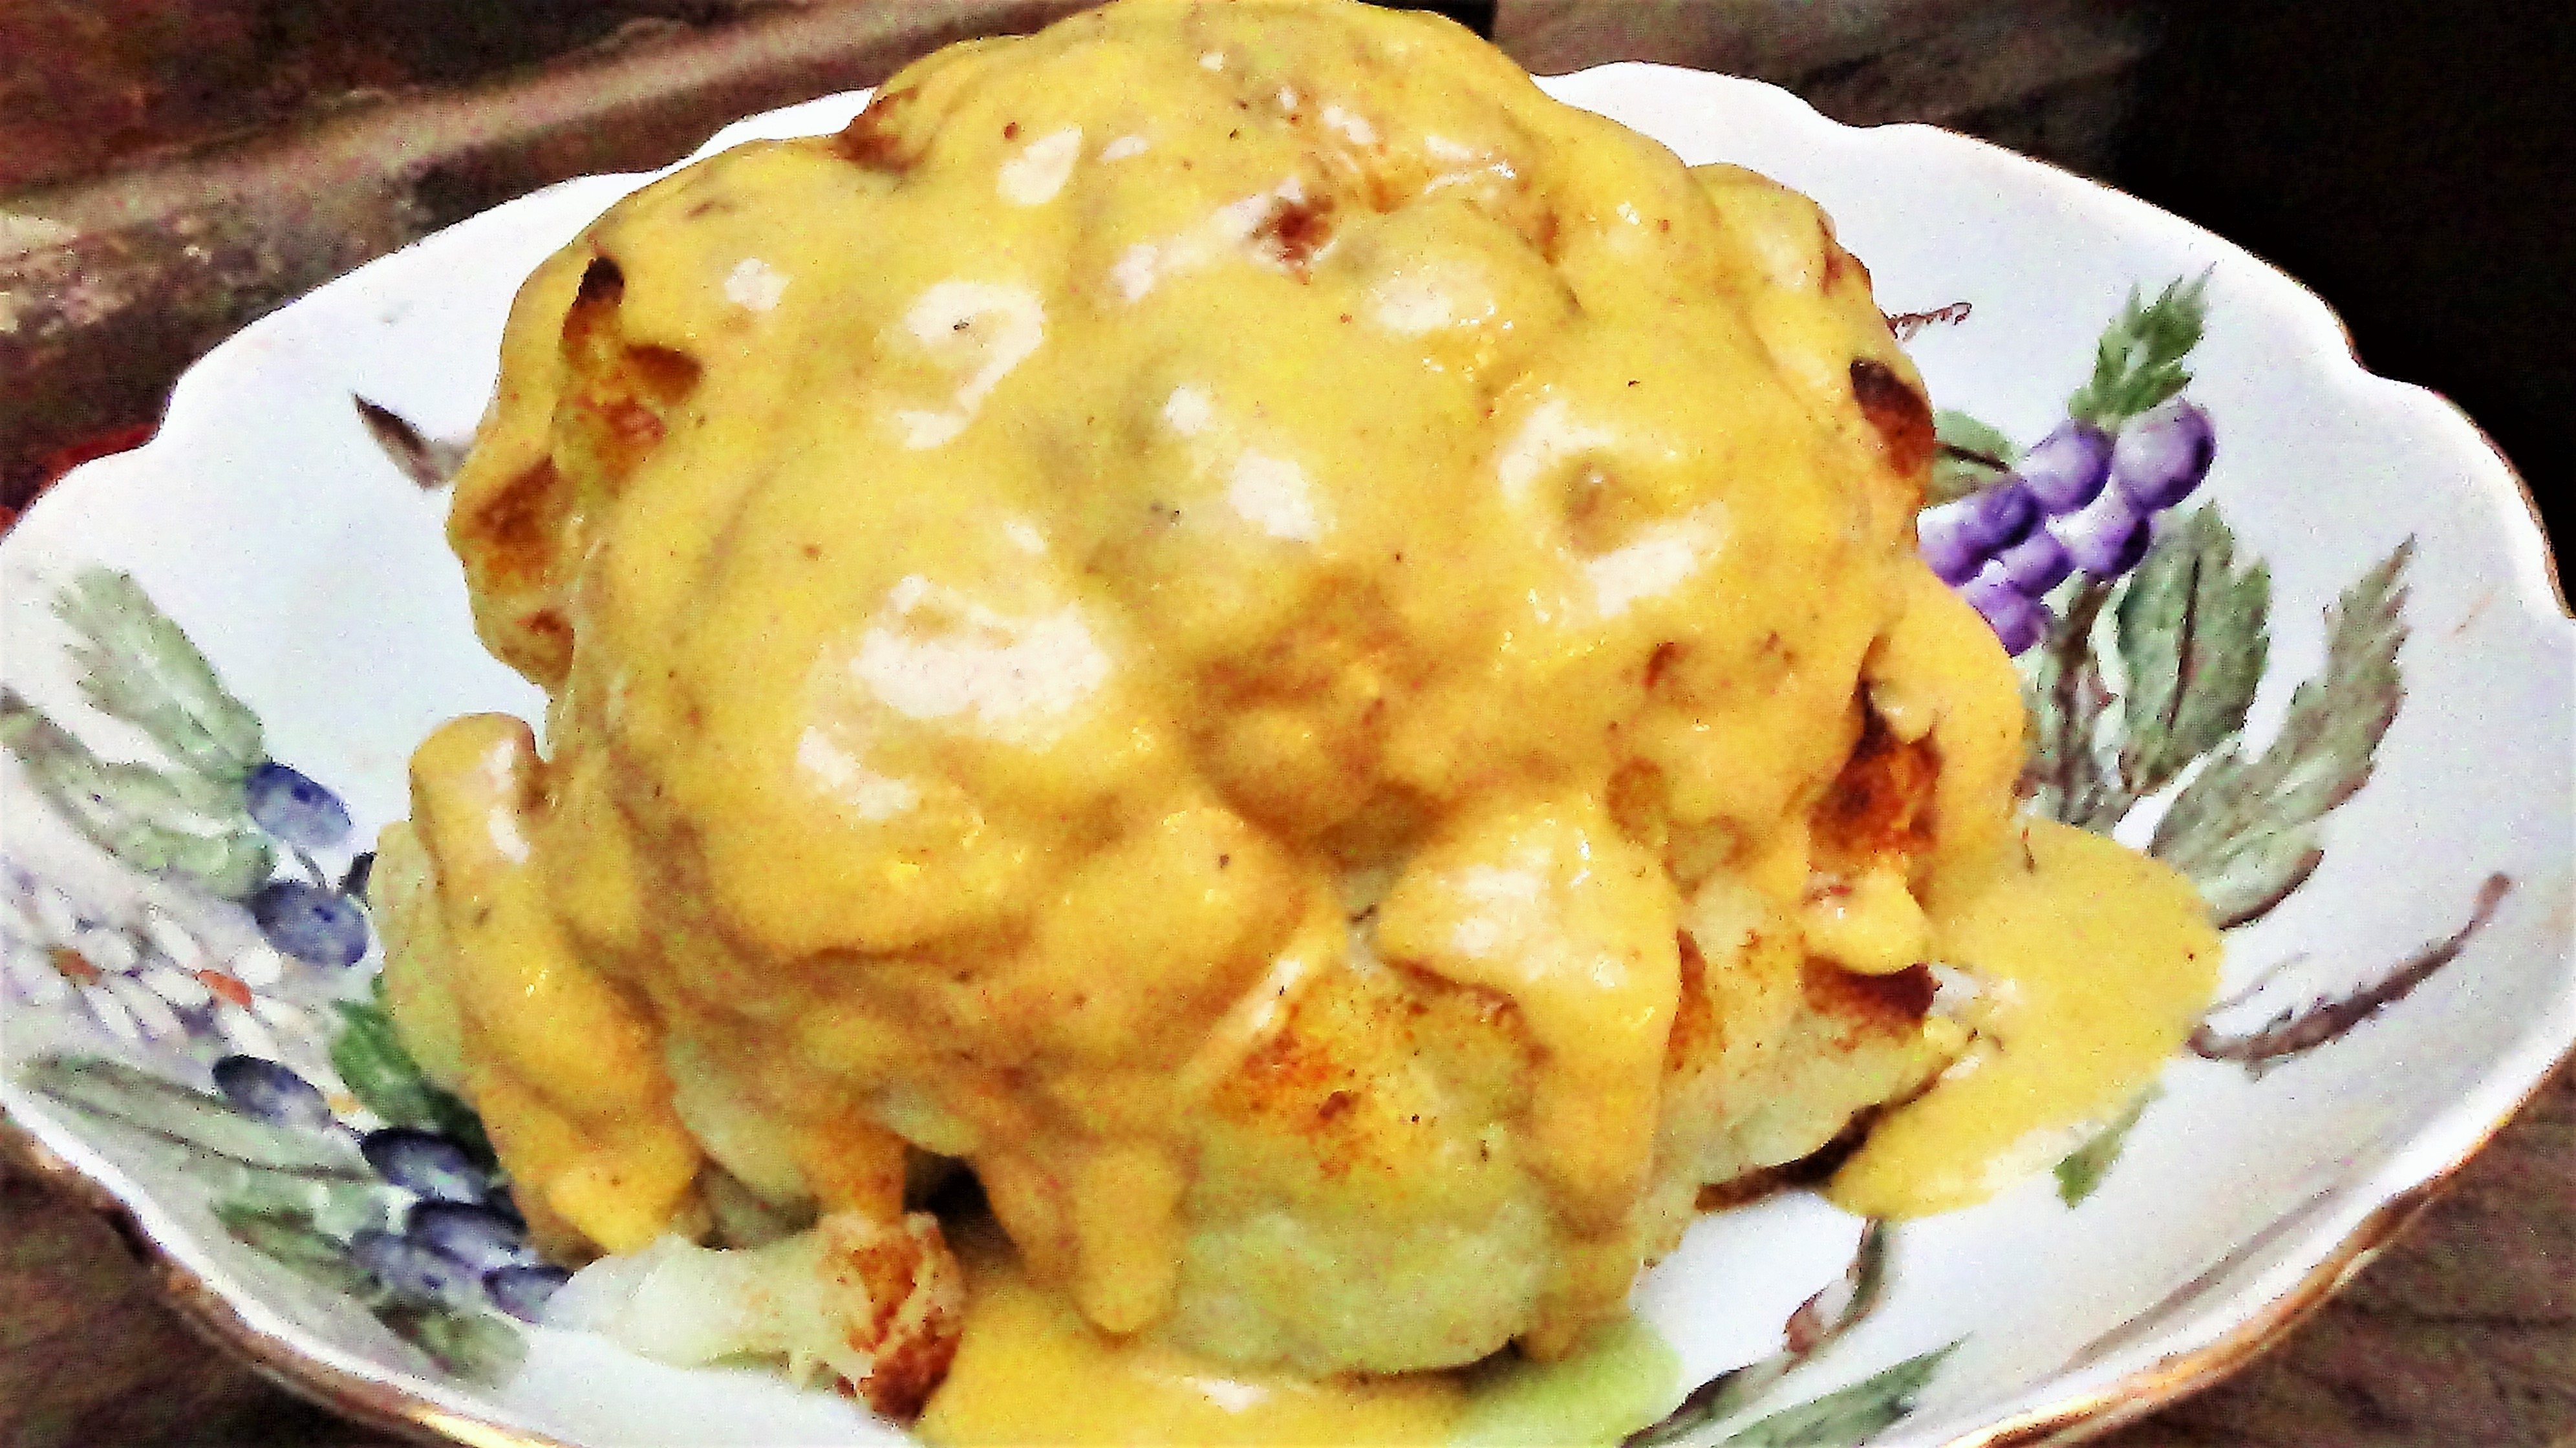 Roasted Cauliflower with Cheddar Beer Sauce